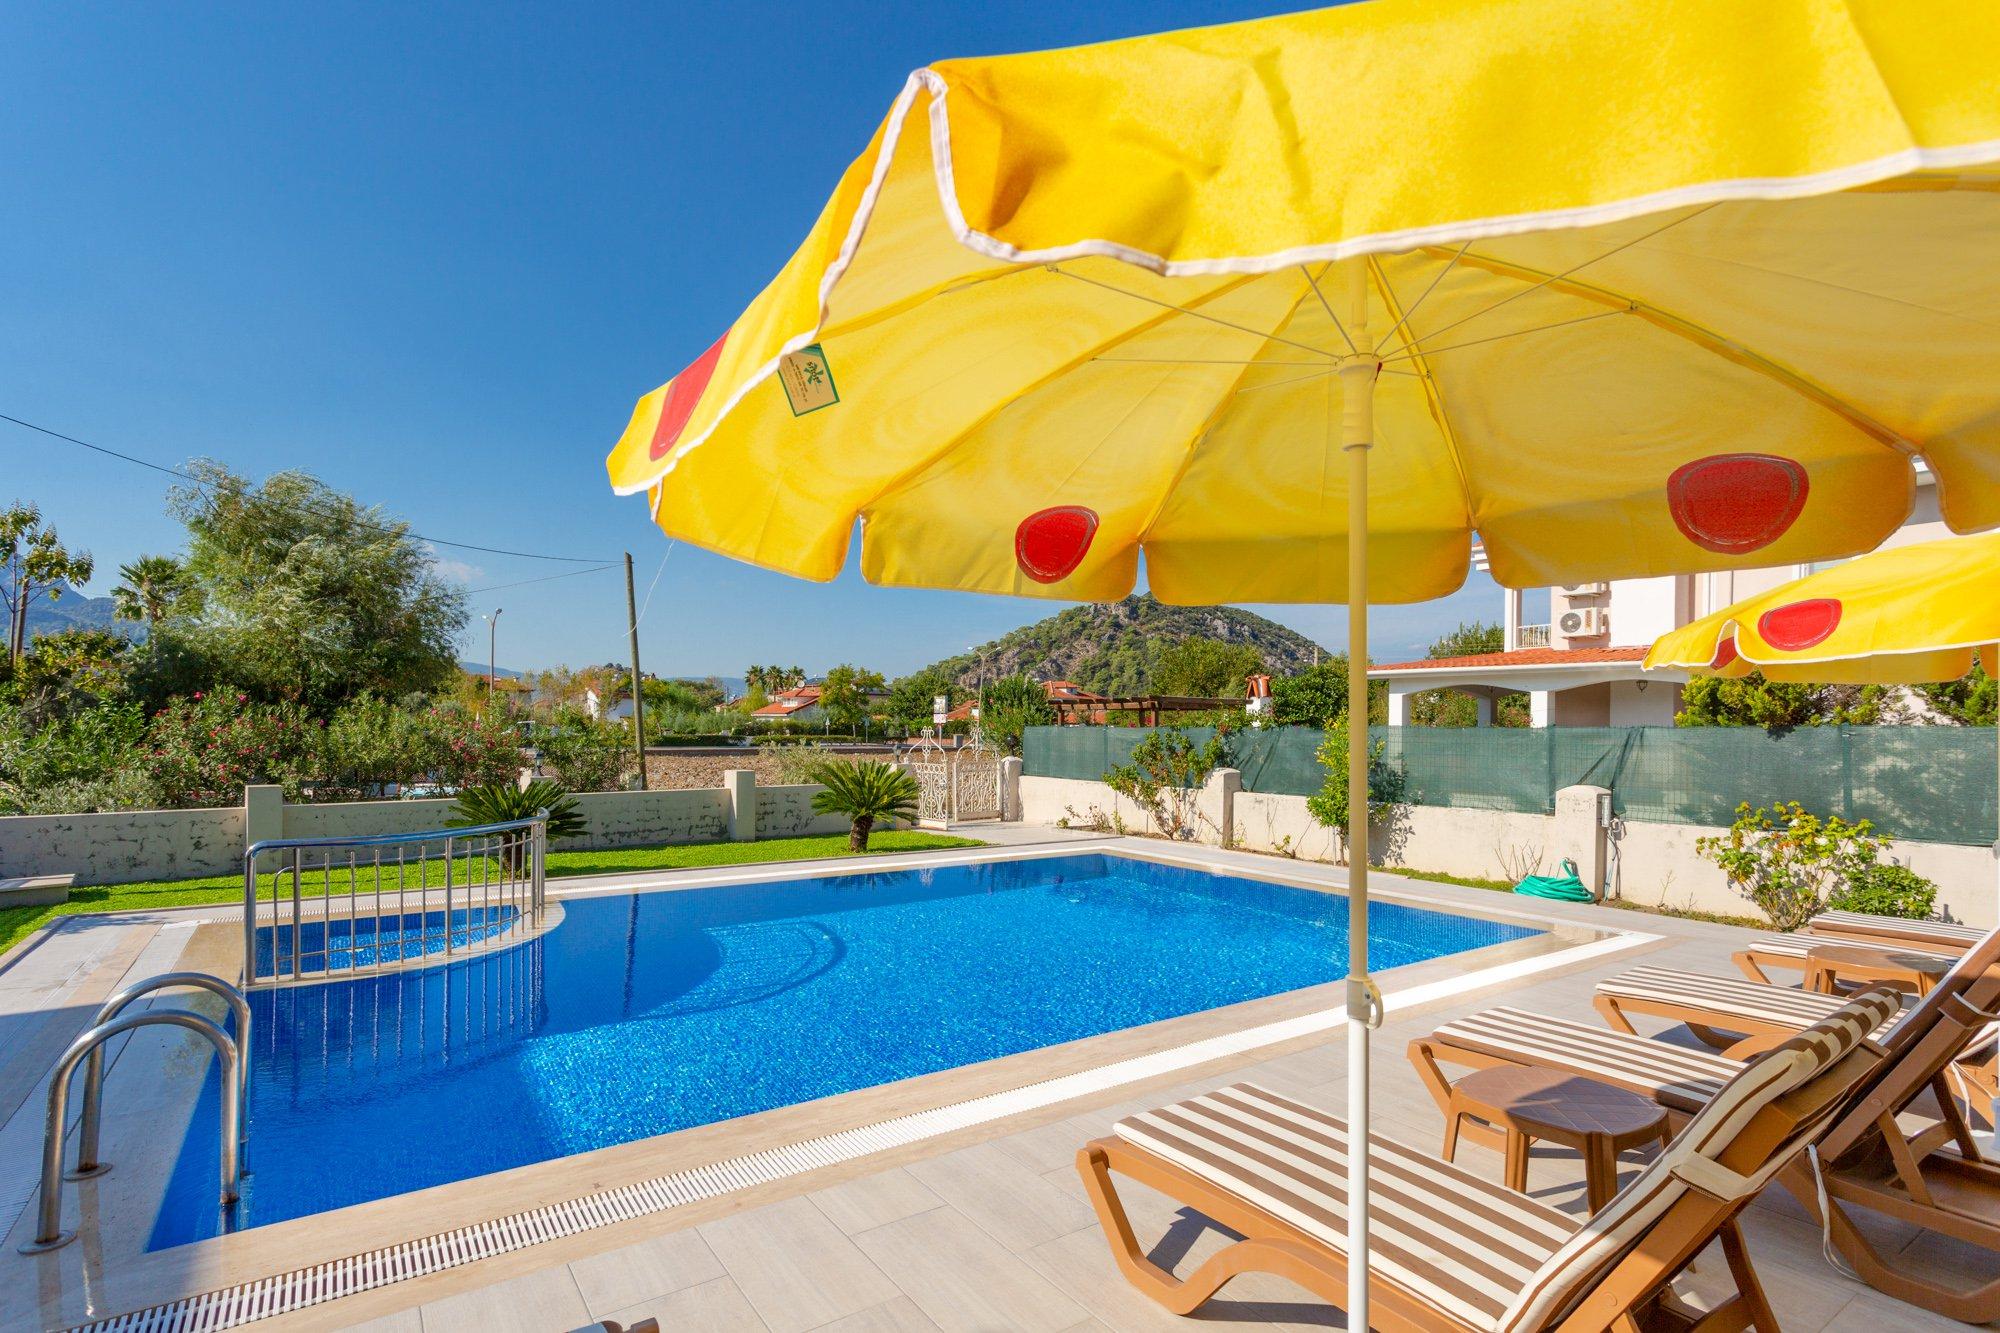 Property Image 2 - Villa Ozcelik  Large Private Pool  A C  WiFi  Car Not Required  Eco-Friendly                         - 283